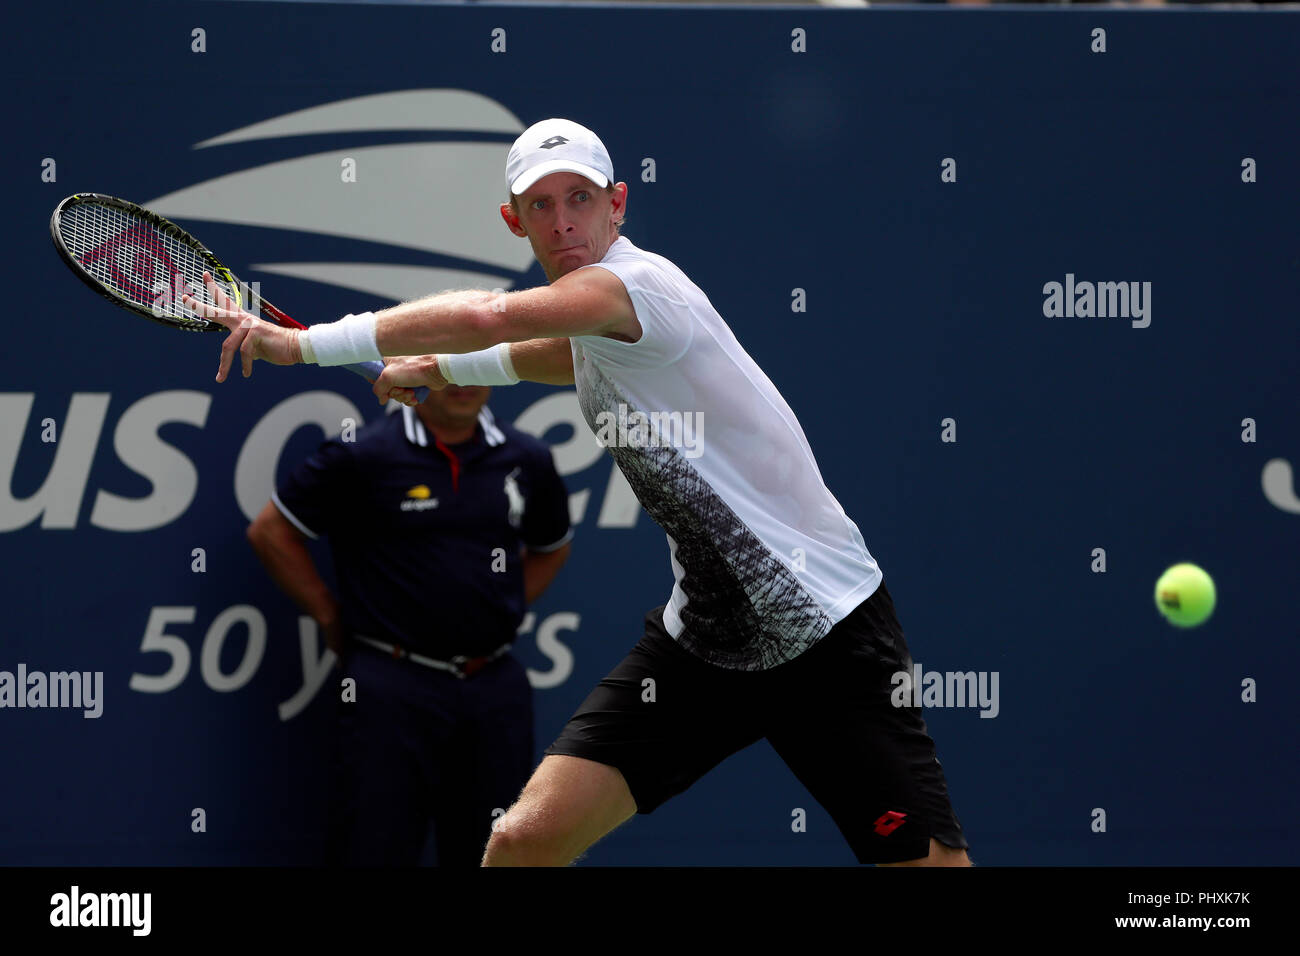 New York, United States. 02nd Sep, 2018. Flushing Meadows, New York - September 2, 2018: US Open Tennis: Kevin Anderson of South Africa in action against Number 9 seed, Dominic Thiem of Austria during their fourth round match at the US Open in Flushing Meadows, New York. Thiem won in straight sets. Credit: Adam Stoltman/Alamy Live News Stock Photo